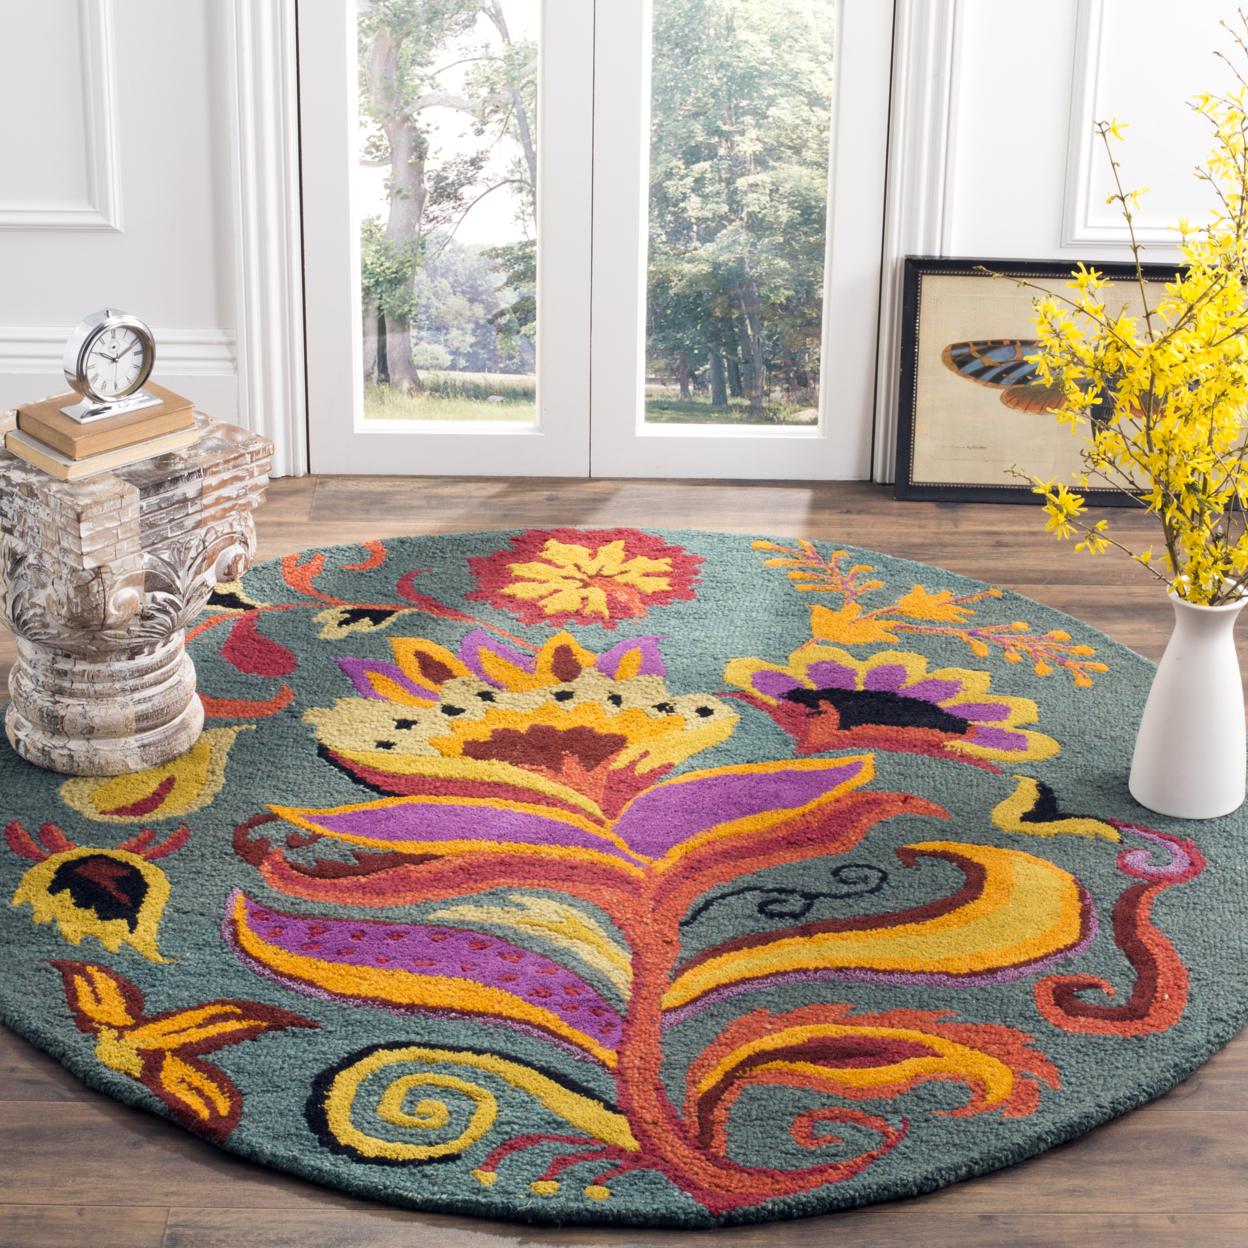 SAFAVIEH Blossom BLM679A Hand-hooked Blue / Multi Rug - 8' Square